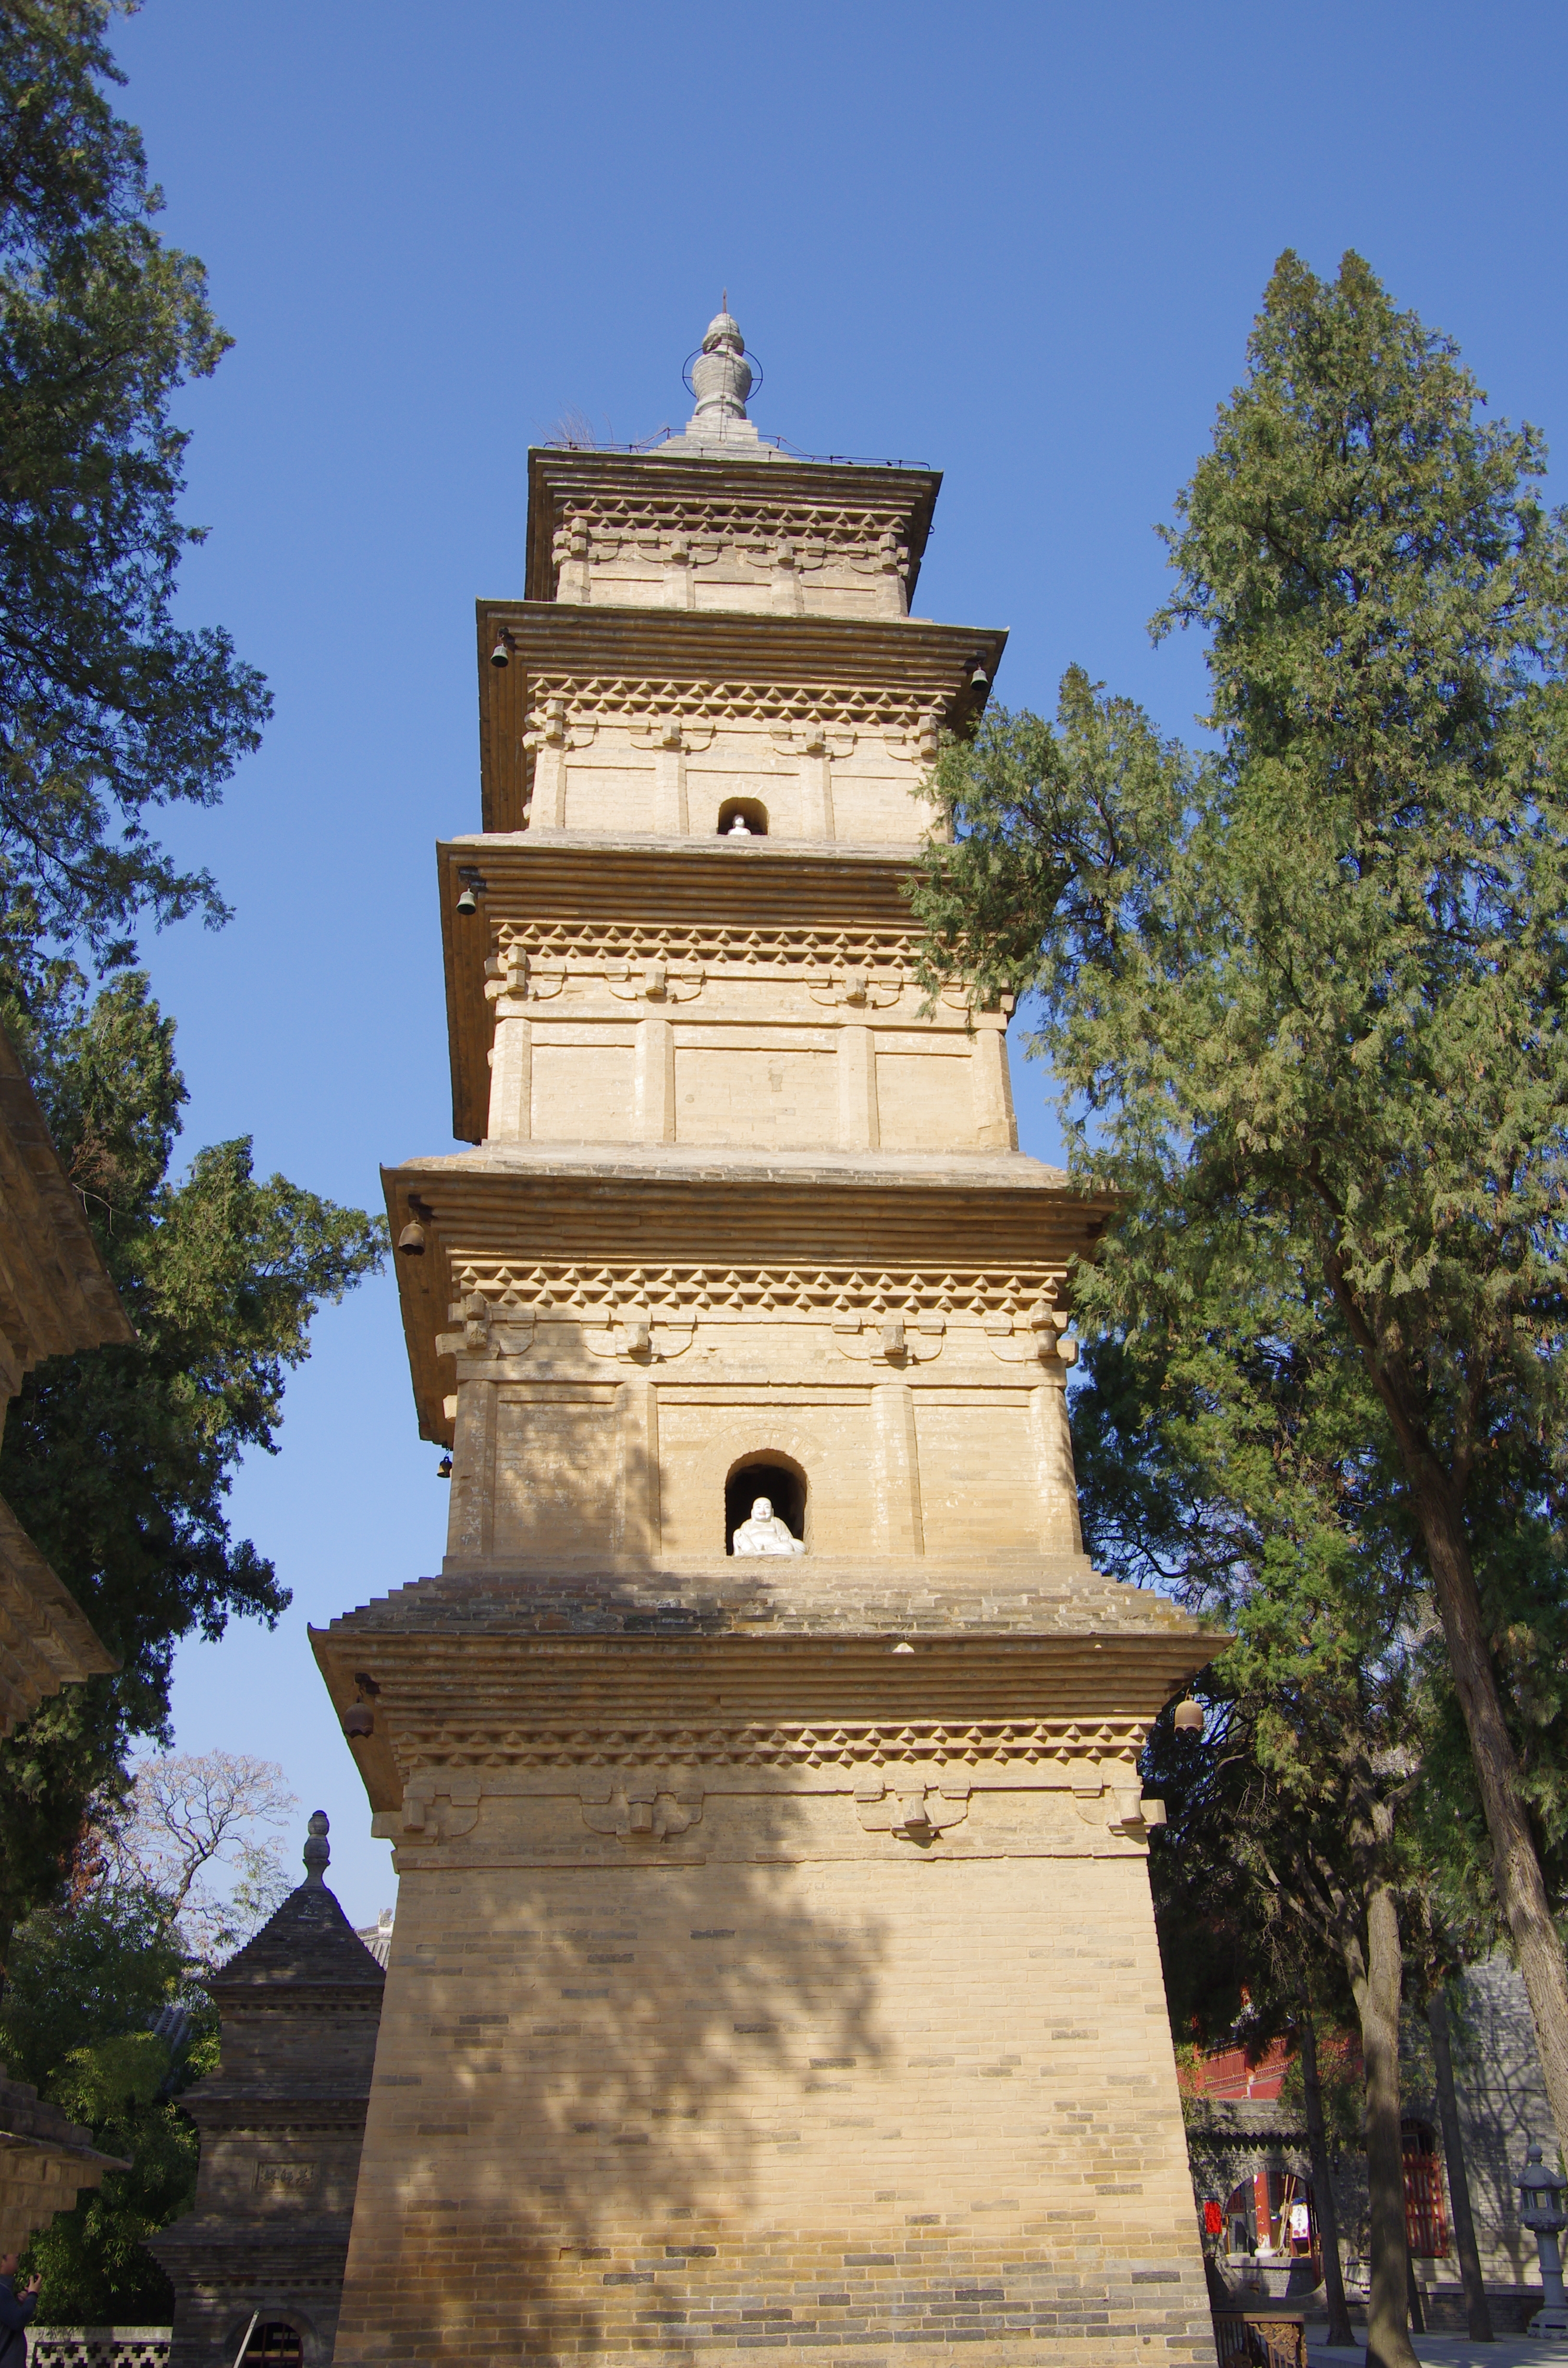 Located in Xi'an, the five-storied Buddhist relic pagoda is situated at the Xingjiao Temple, the most famous temple of the Tang Dynasty. /CFP